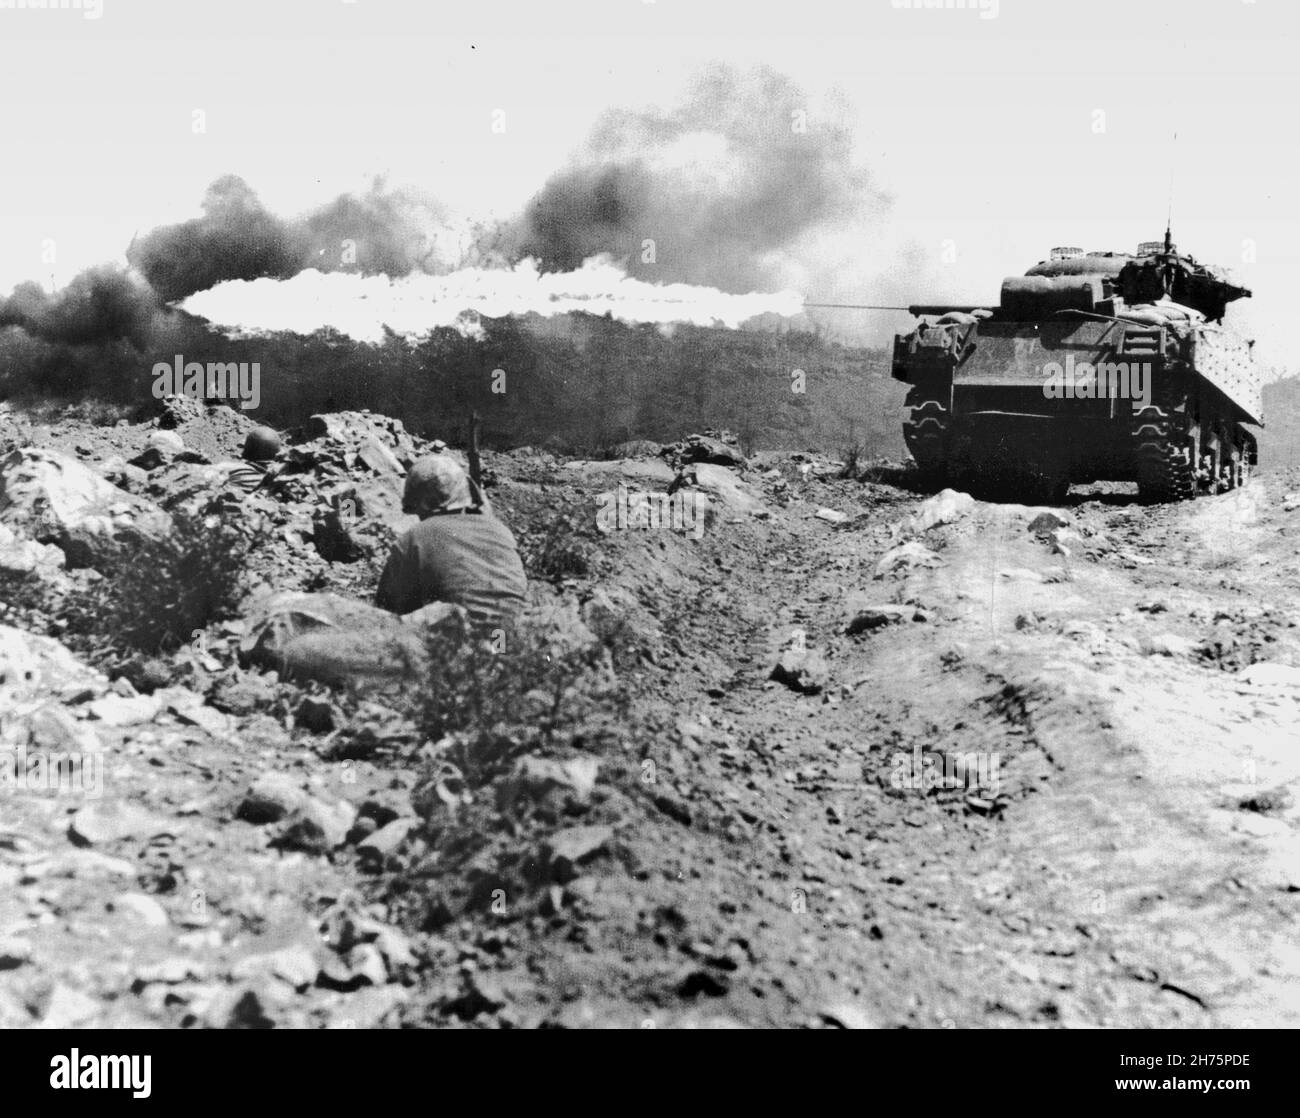 IWO JIMA, PACIFIC OCEAN - March 1945 - A Marine flame throwing tank, also known as a 'Ronson', scorches a Japanese strongpoint. The eight M4A3 Sherman Stock Photo